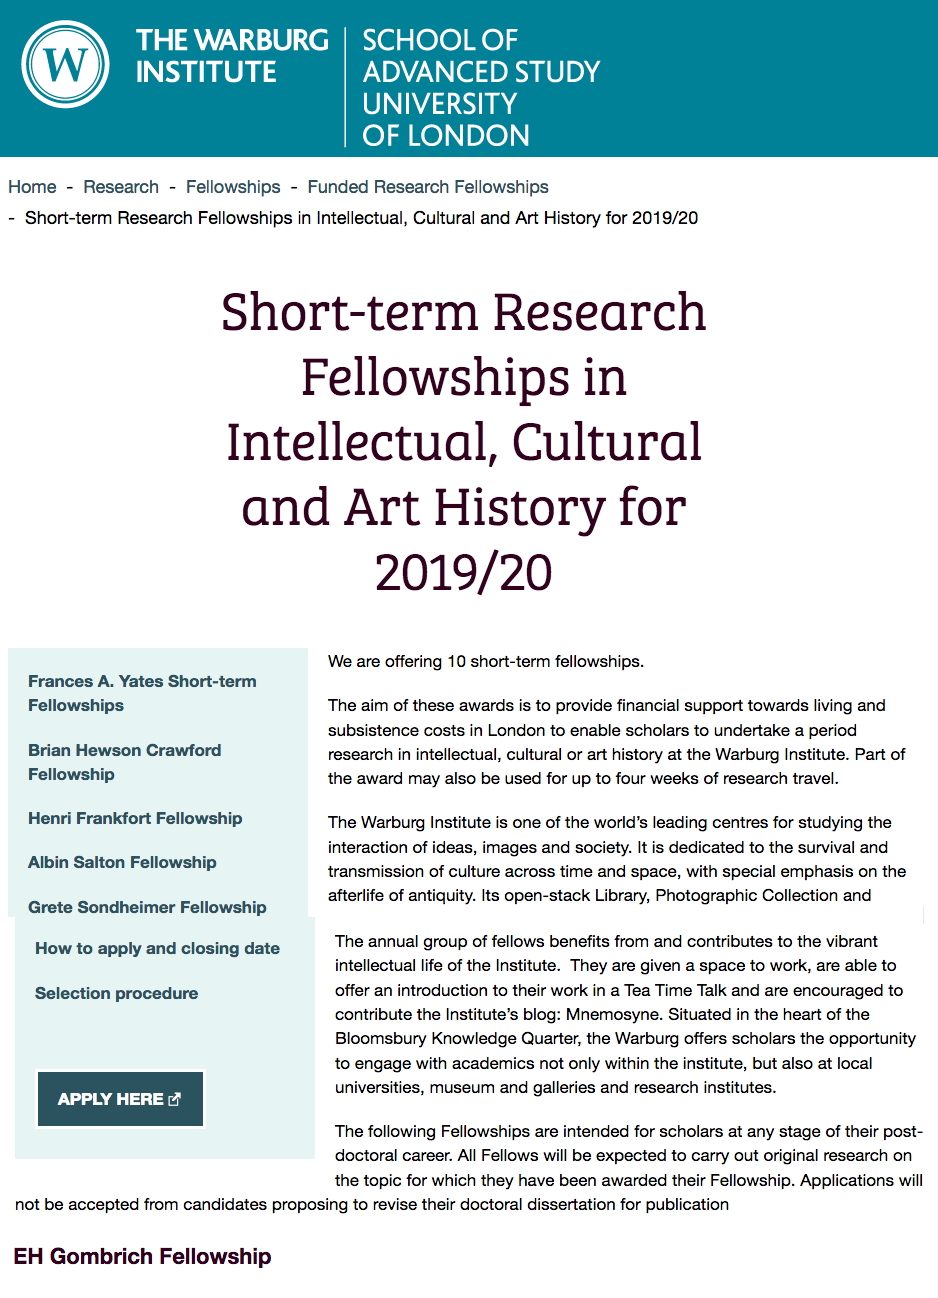 Page Internet. The Warburg Institute. Short-term Research Fellowships in Intellectual, Cultural and Art History for 2019-20.2018-11-08